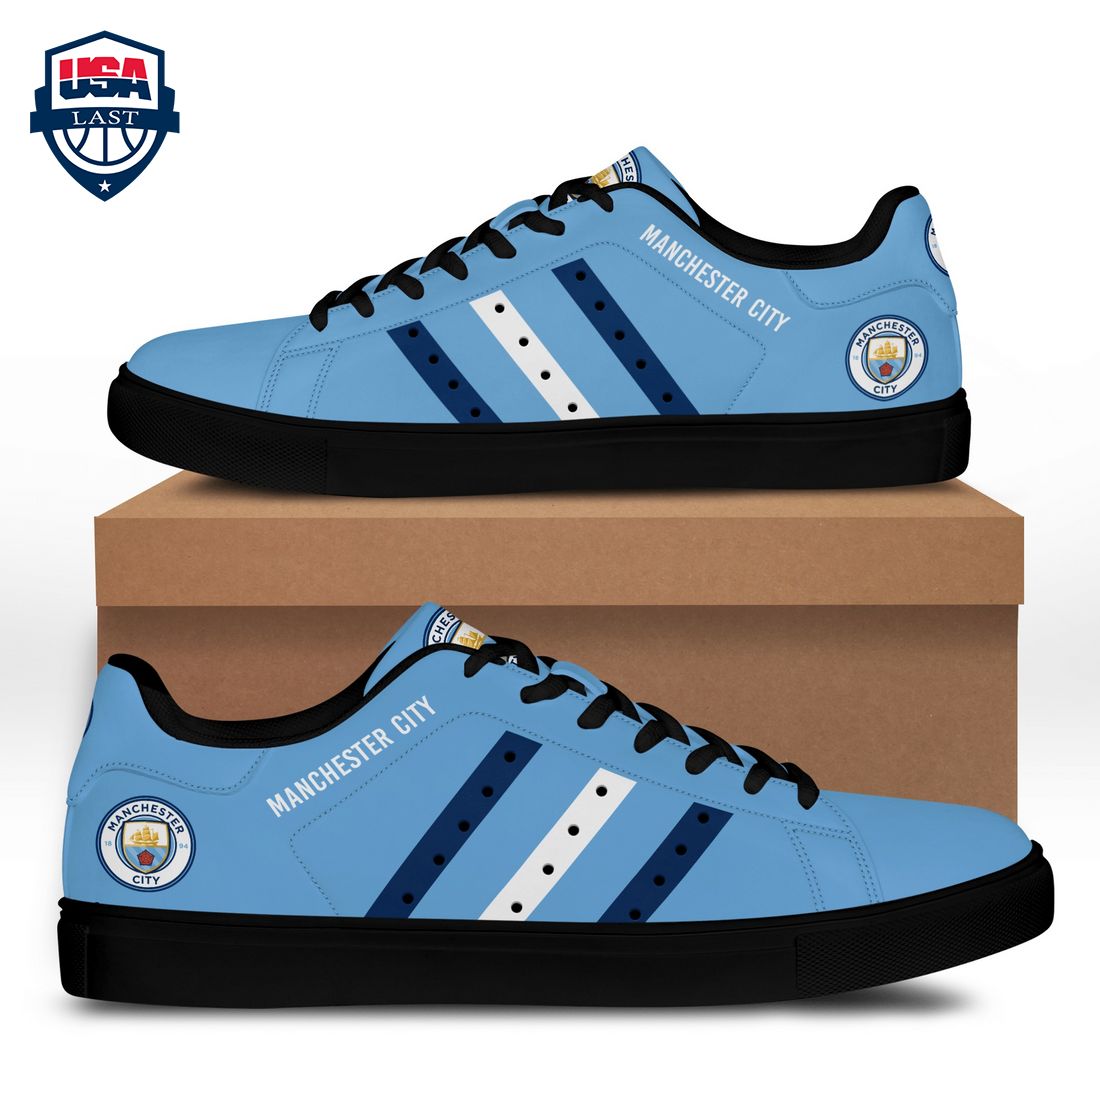 manchester-city-fc-navy-white-stripes-stan-smith-low-top-shoes-1-9DNJD.jpg